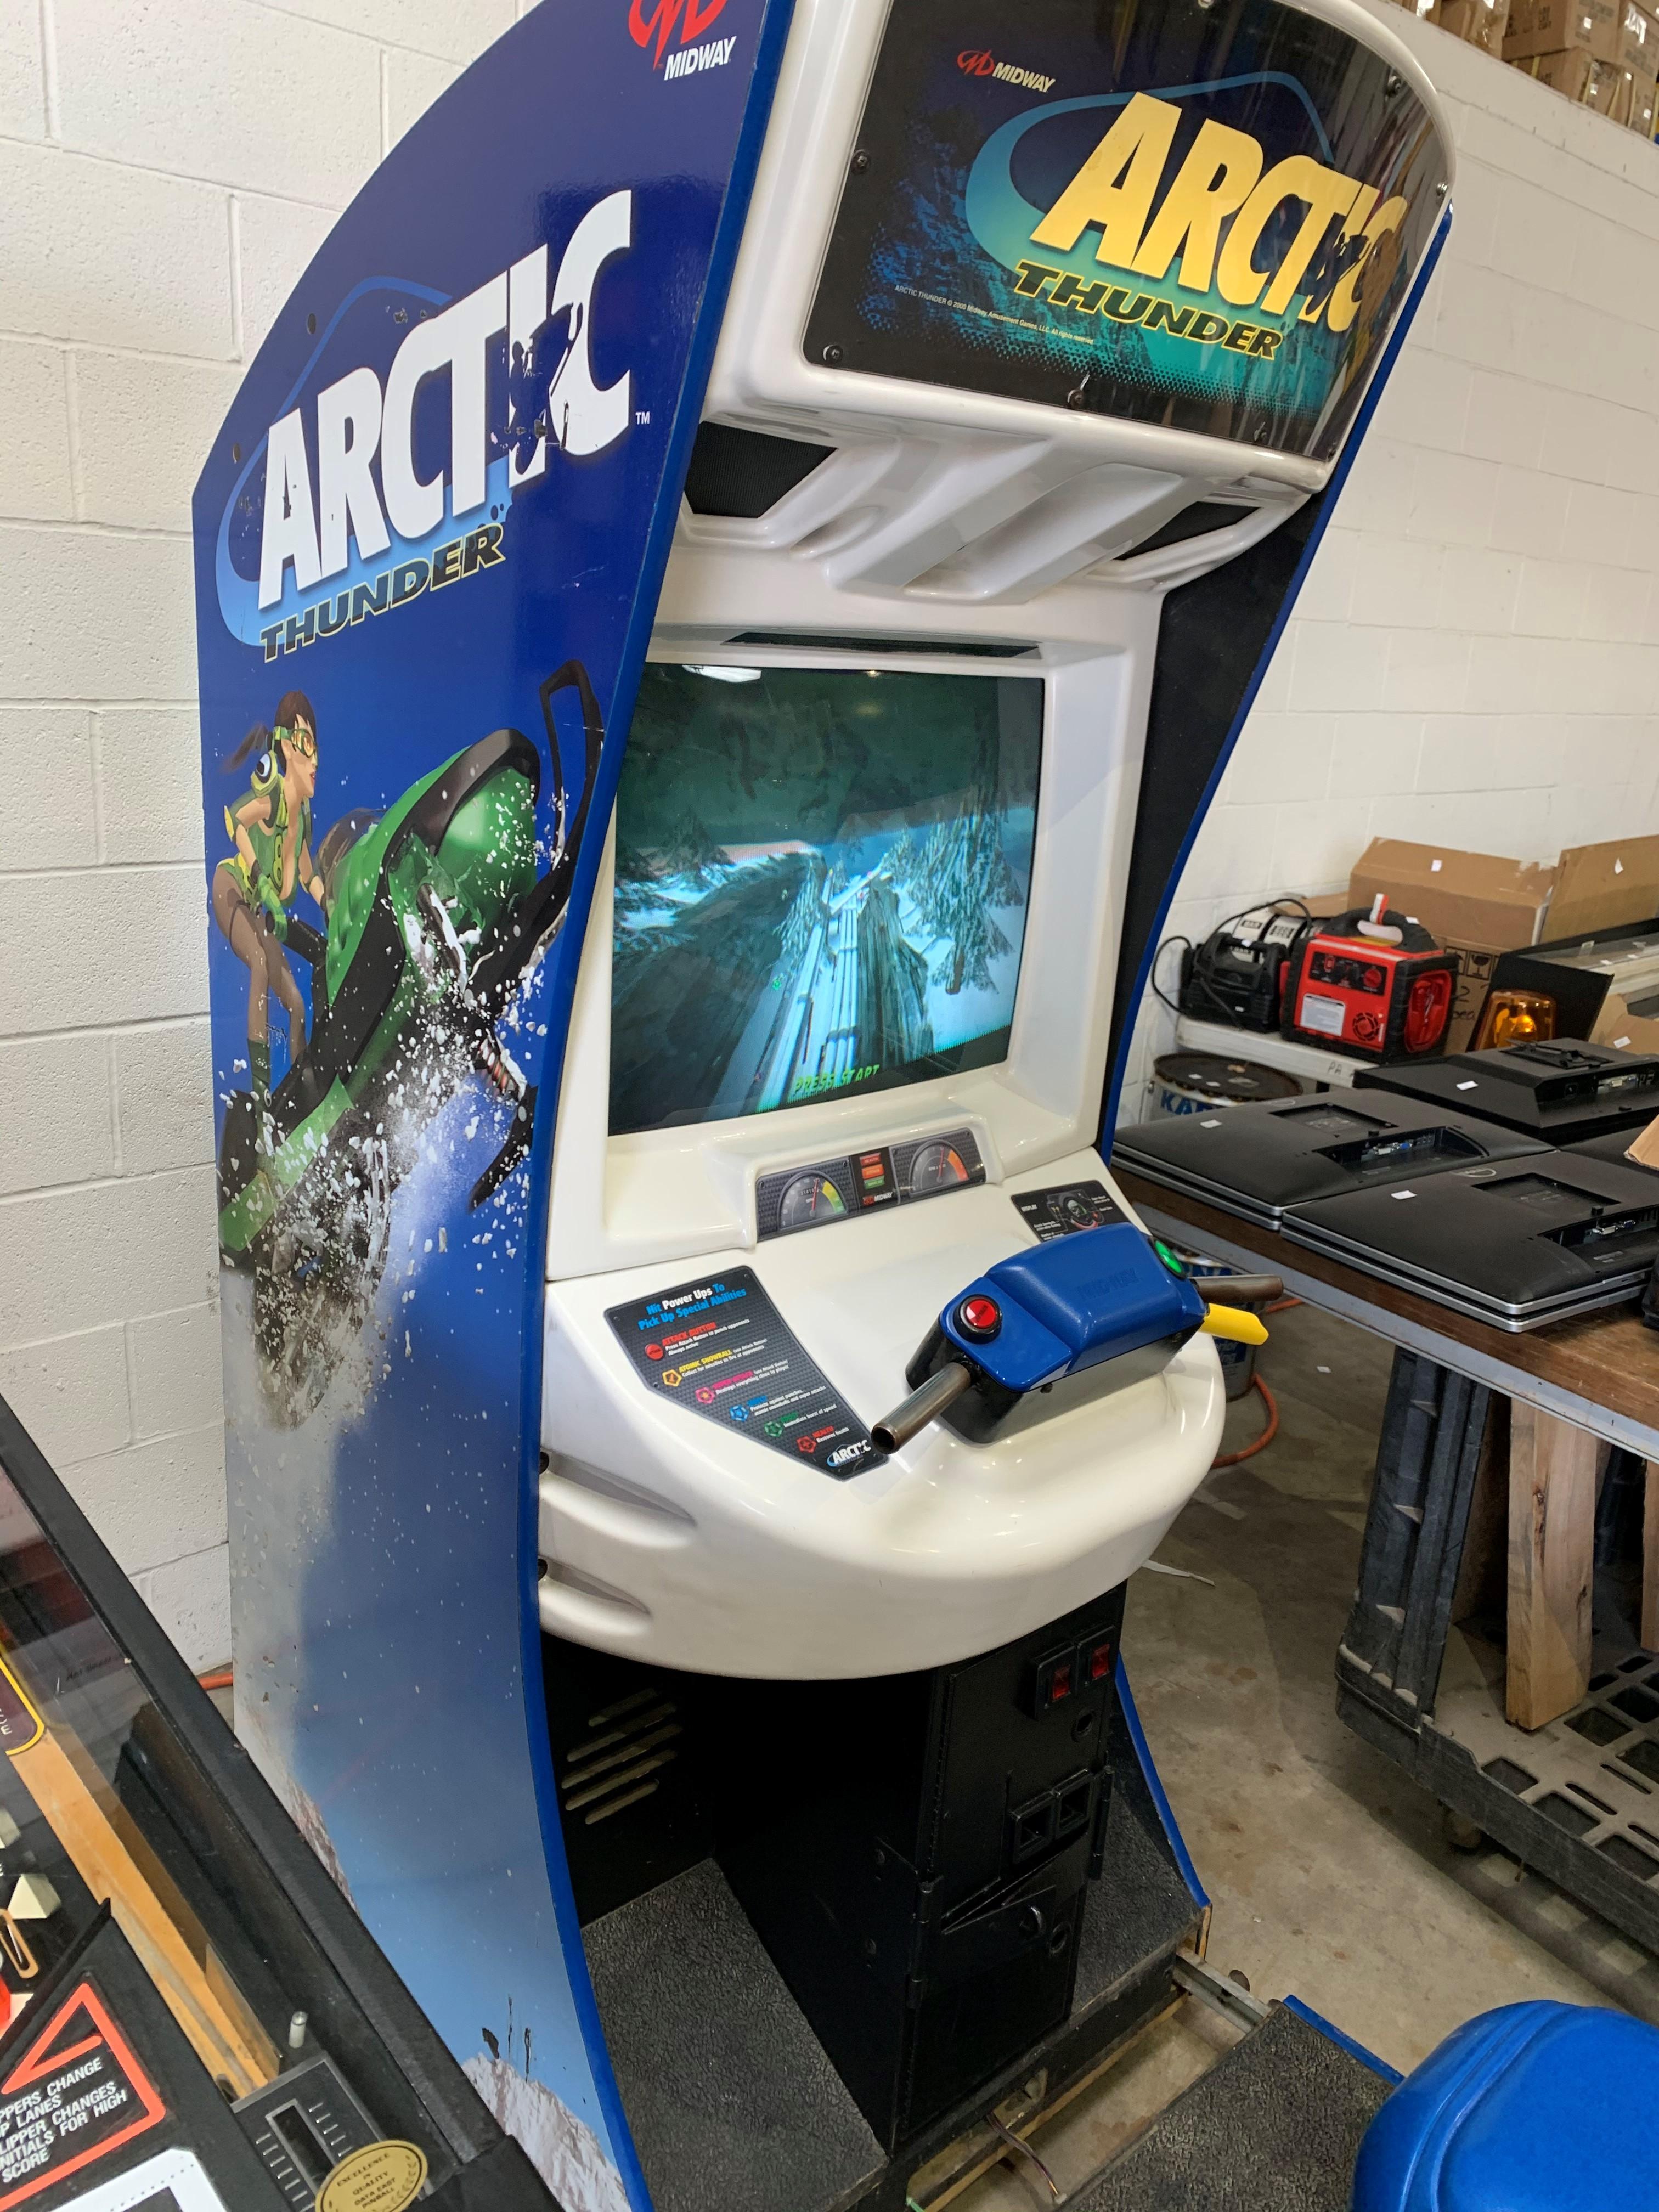 Arctic Thunder Arcade Game By Midway